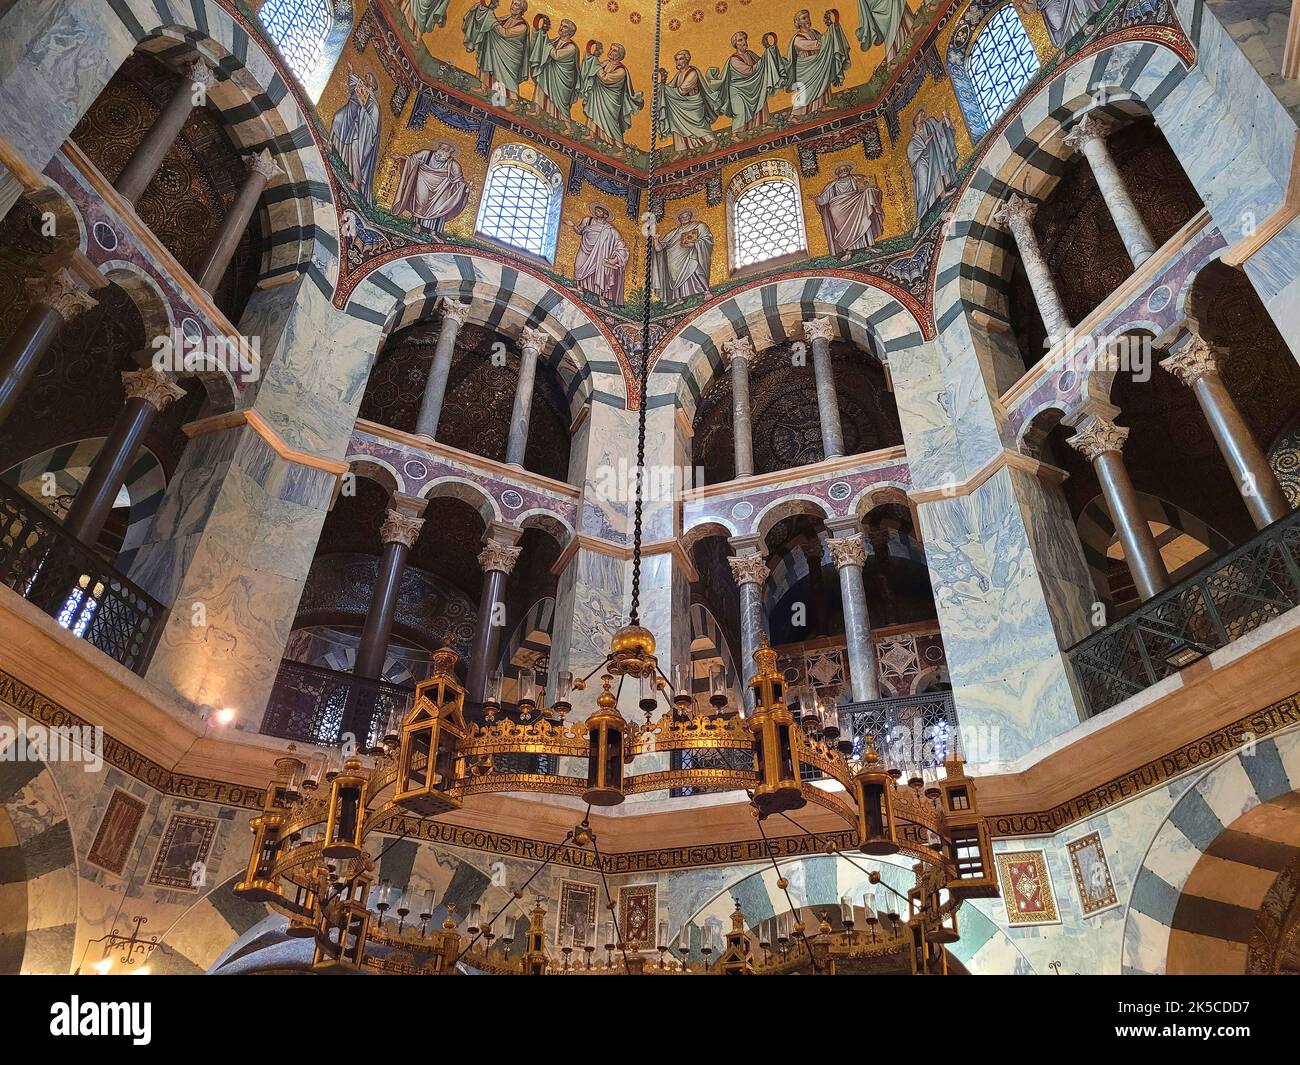 Octagon in Aachen Cathedral, Aachen, North Rhine-Westphalia, Germany Stock Photo